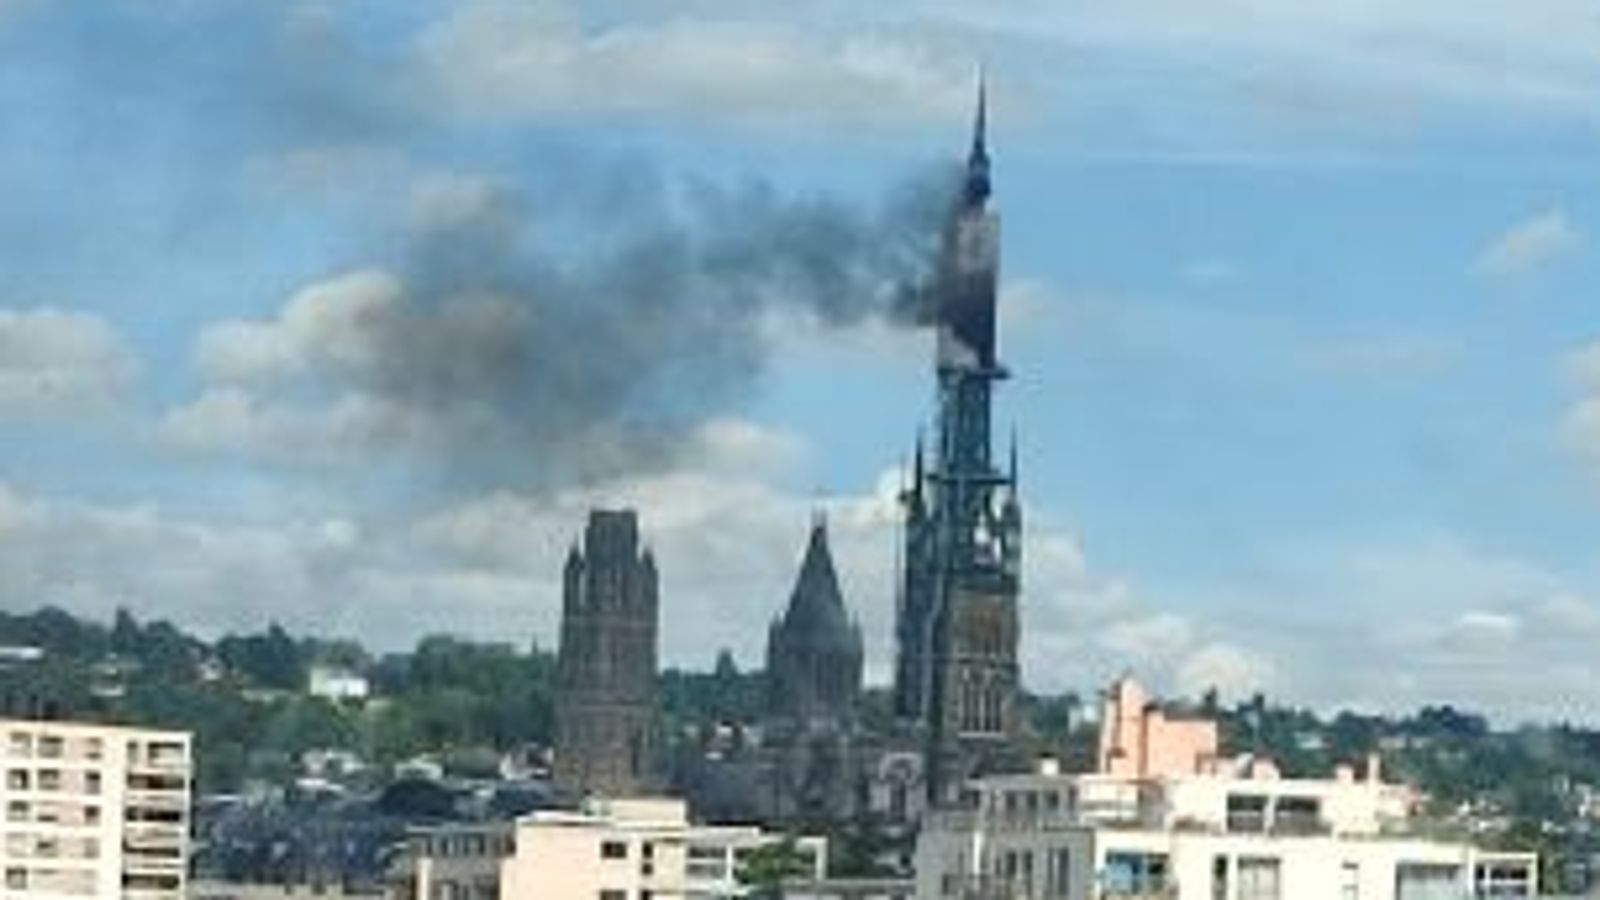 Rouen: Tower of famous French cathedral burns | World news